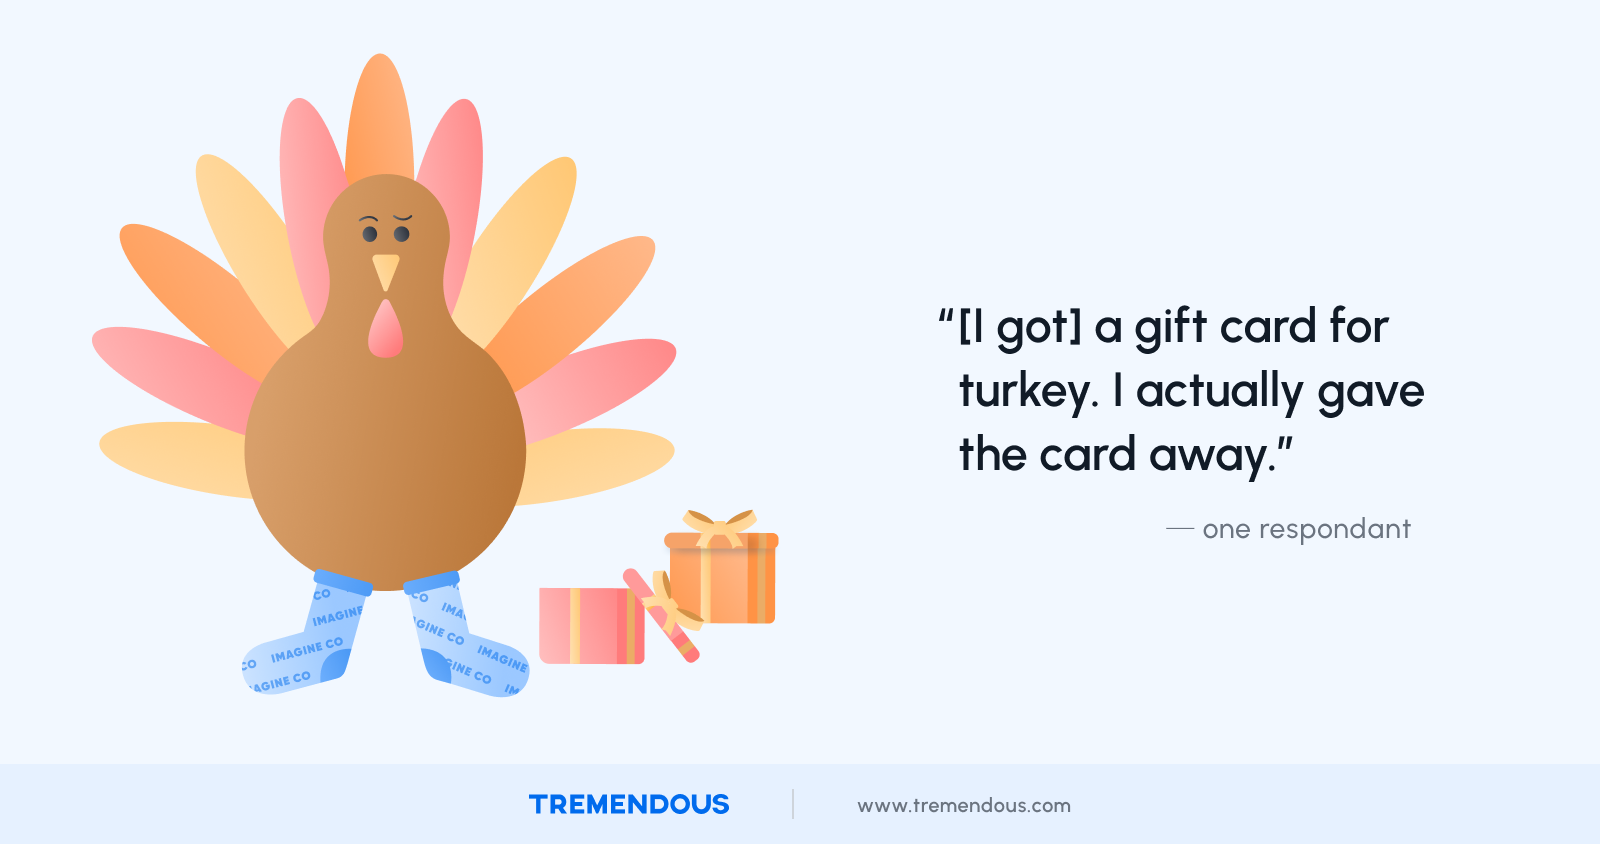 "[I got] a gift card for turkey. I actually gave the card away."